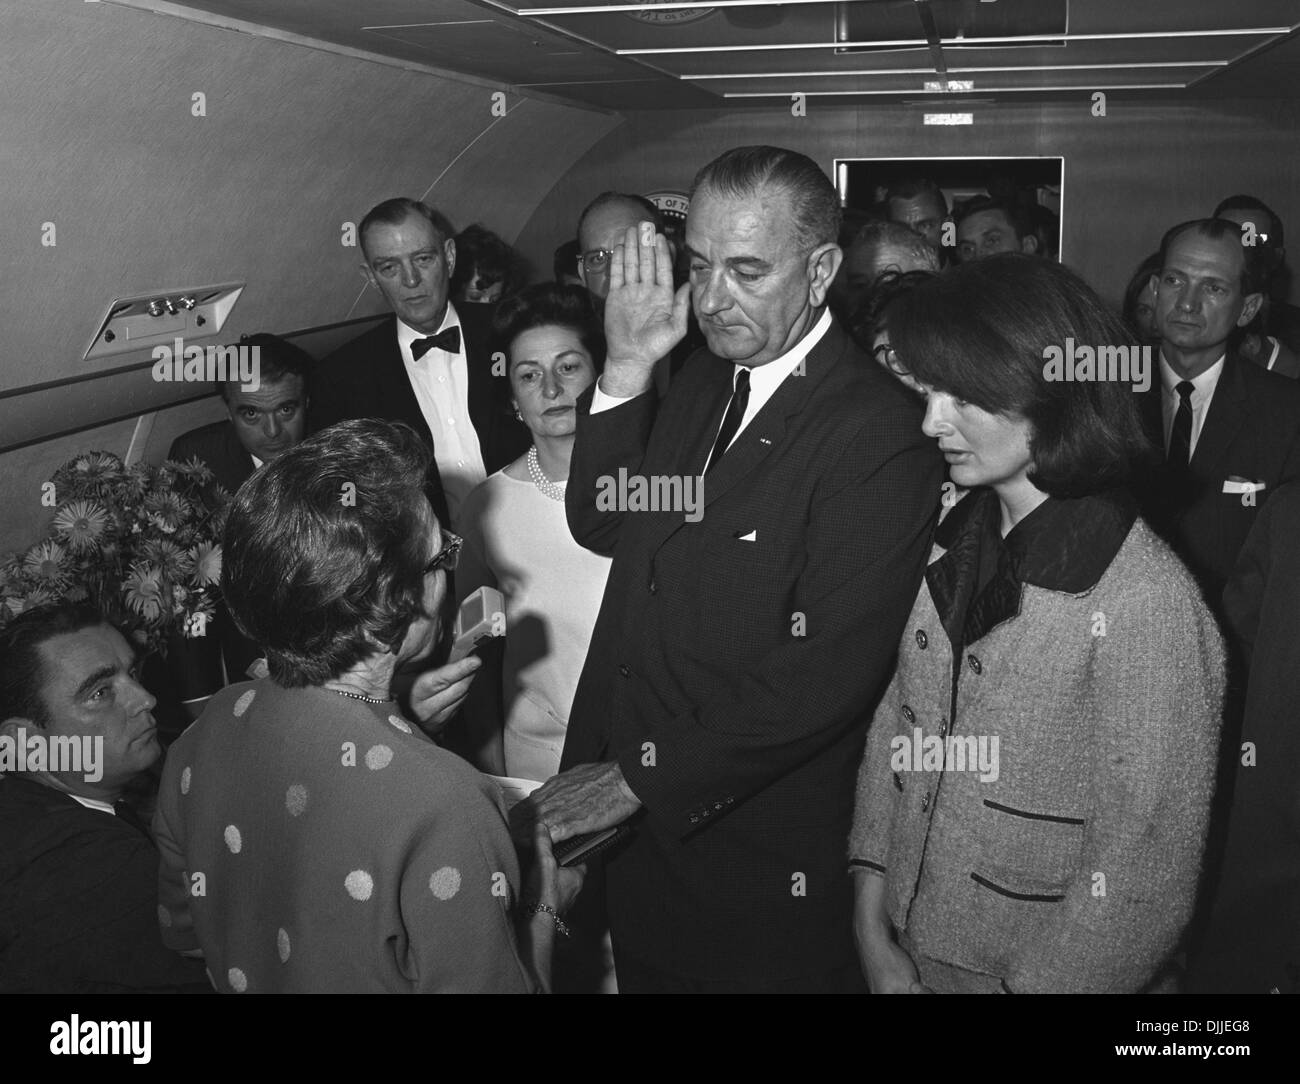 US Vice President Lyndon B. Johnson is sworn in as President by Judge Sarah Hughes following the death of John F. Kennedy onboard Air Force One November 22, 1963 in Dallas, Texas. Attending the event are L-R: Mac Kilduff (lower left corner), Jack Valenti, , Congressman Albert Thomas, Lady Bird Johnson, Chief Jessie Curry (behind LBJ's hand), Jacqueline Kennedy and Congressman Jack Brooks. Stock Photo